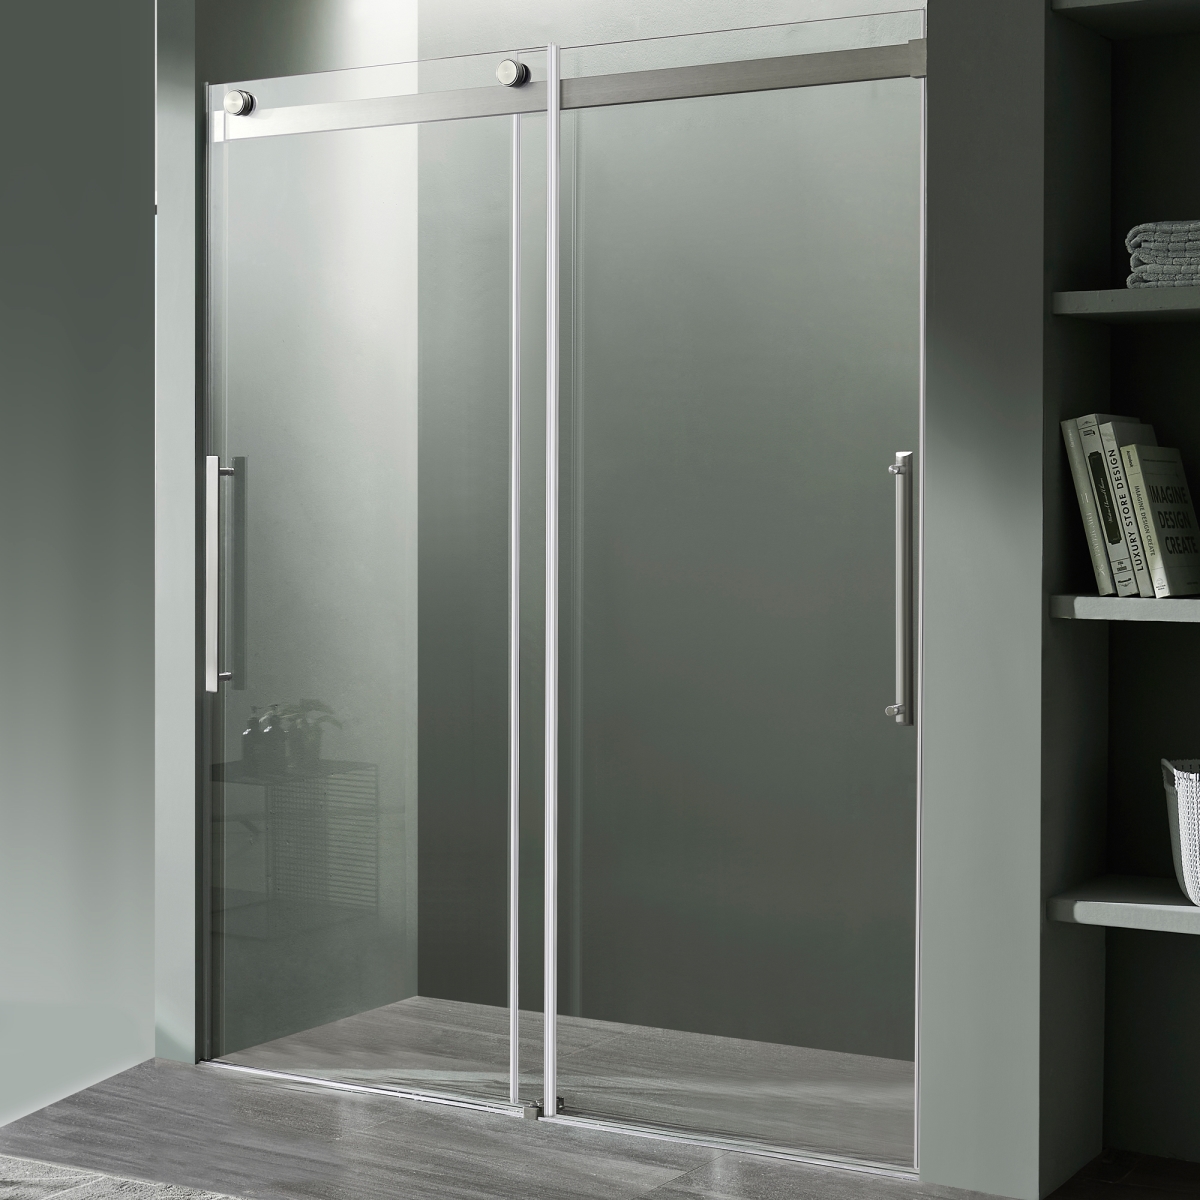 Picture of Anzzi SD-FRLS05901BN 48 x 76 in. Stellar Series Frameless Sliding Shower Door with Handle, Brushed Nickel